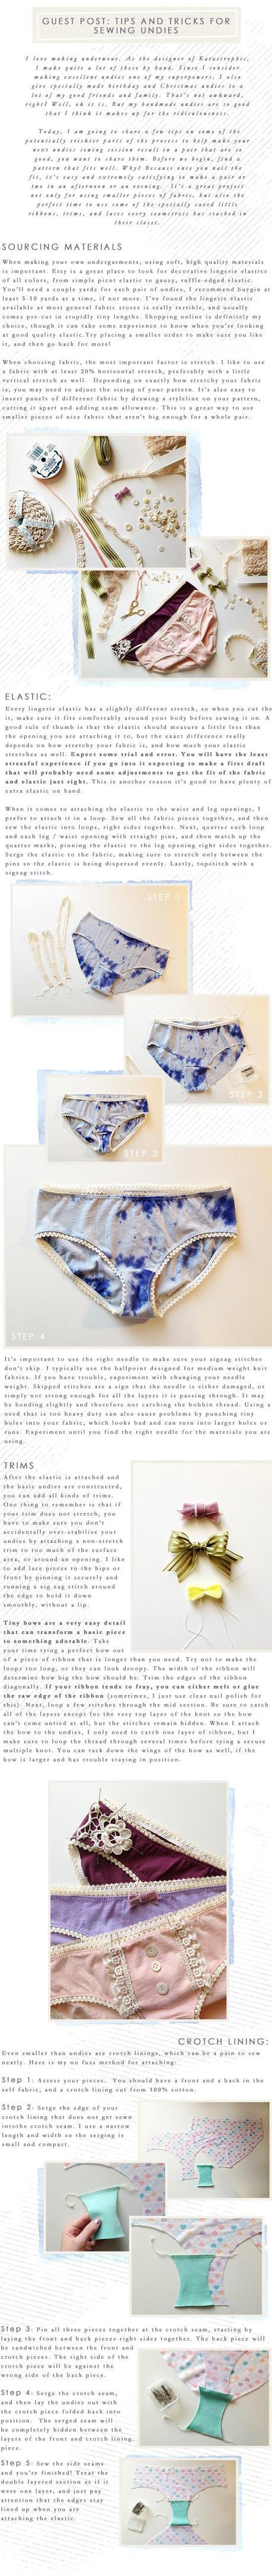 katastrophic 02 Guest Post: Tips and Tricks for Sewing Undies